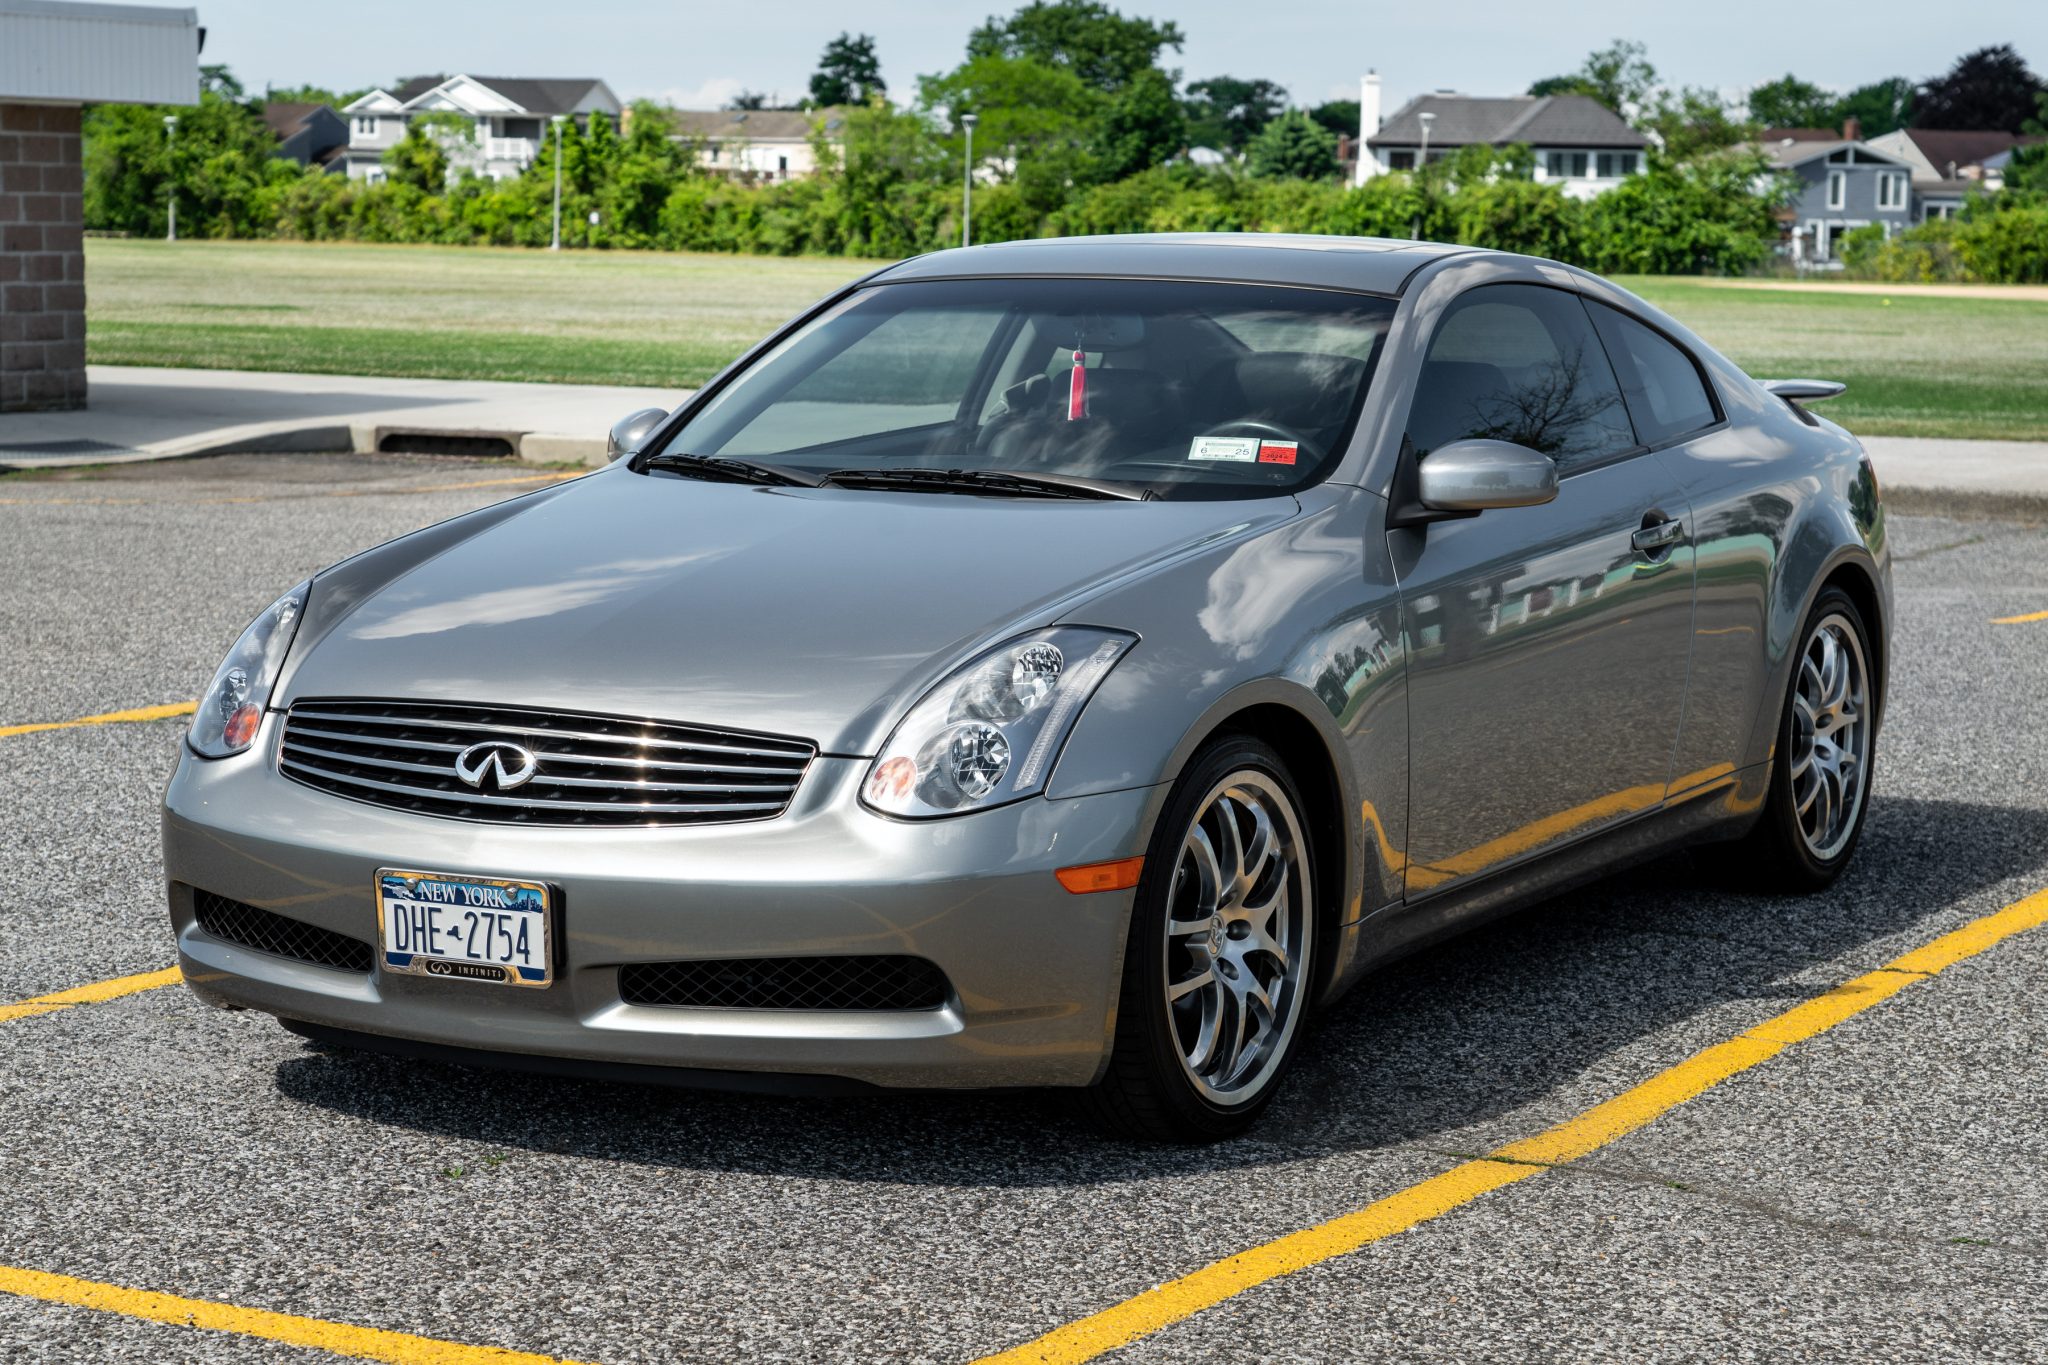 Used 7k-Mile 2005 Infiniti G35 Coupe 6-Speed Review